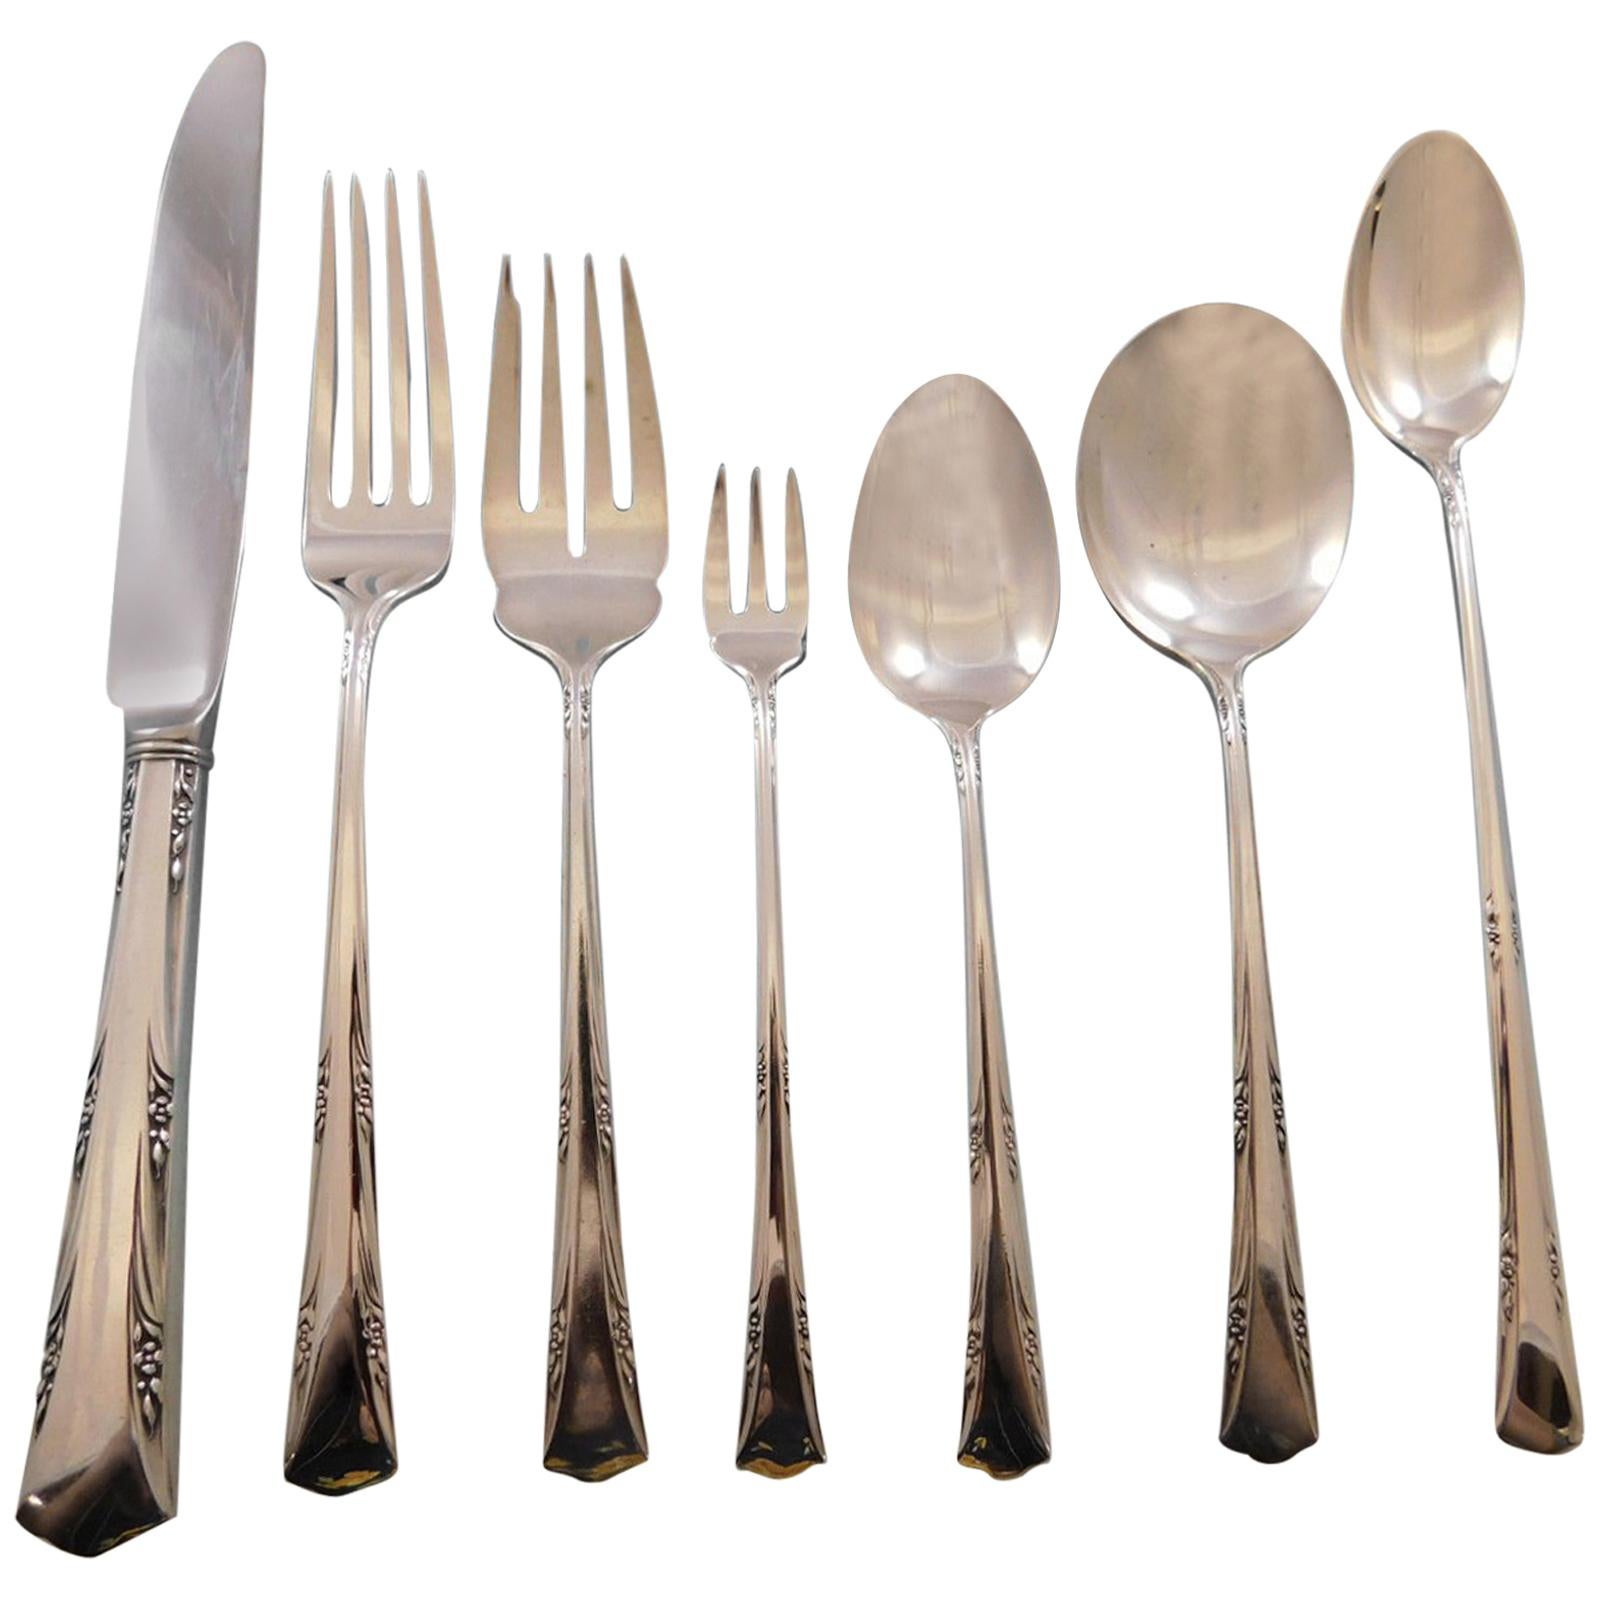 Greenbrier by Gorham Sterling Silver Flatware Set for 8 Service 56 Pieces